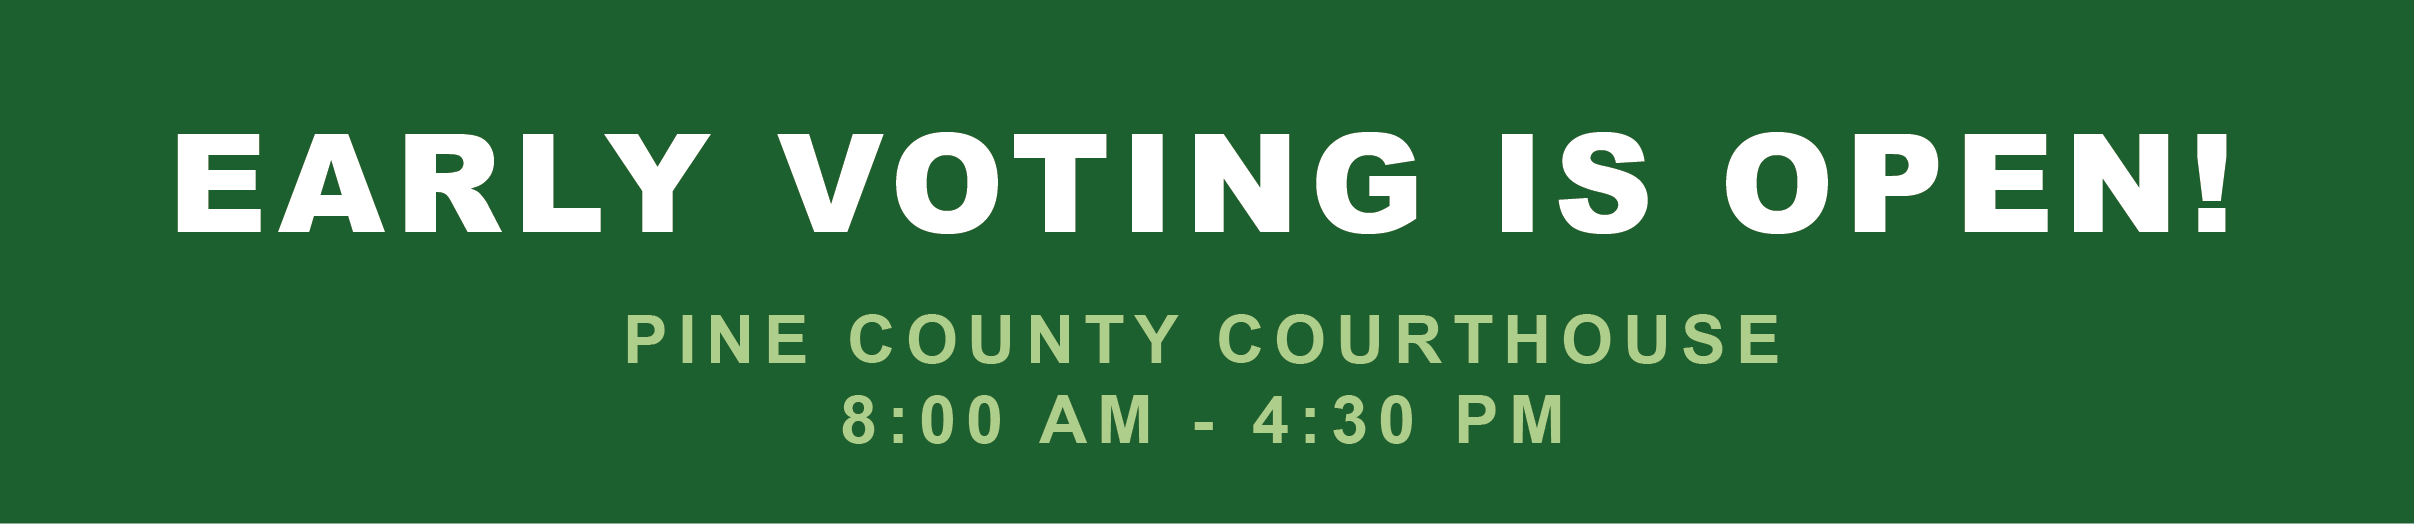 Early Voting is open